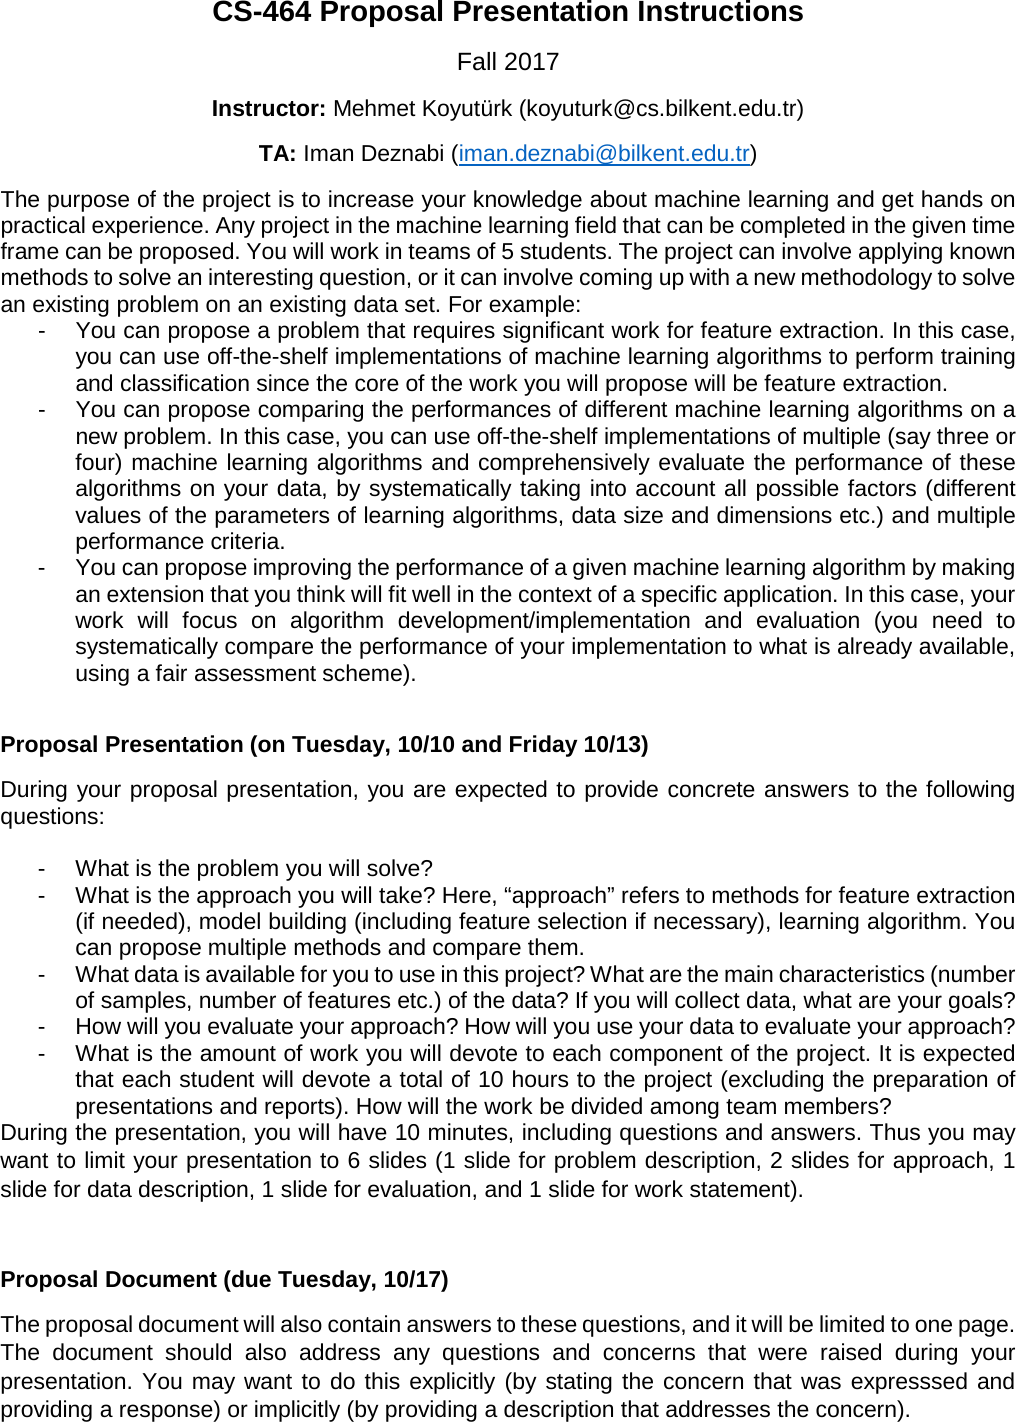 Page 1 of 1 - CS464 Proposal Presentation Instructions